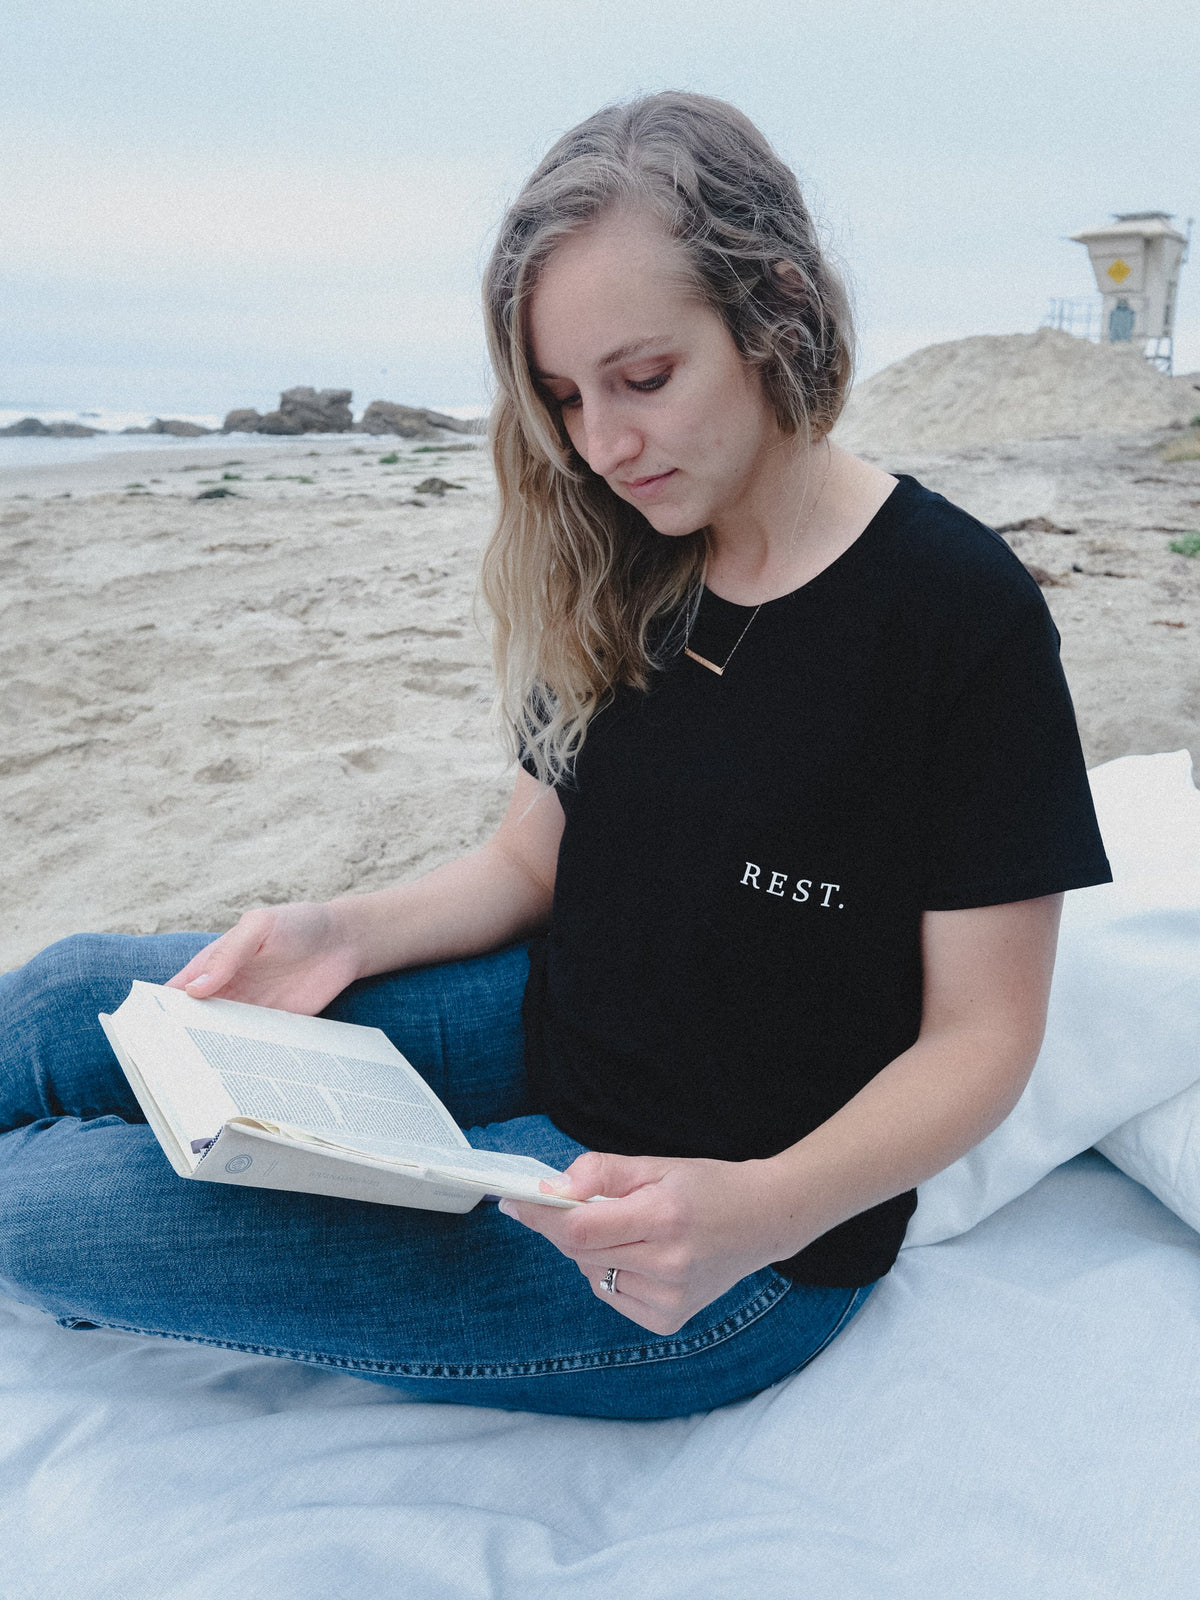 Rejoice & Do Good Christian Apparel - Women's Black Pocket T-shirt Tee with the words Rest on the pocket based on Genesis and the 7th day of rest